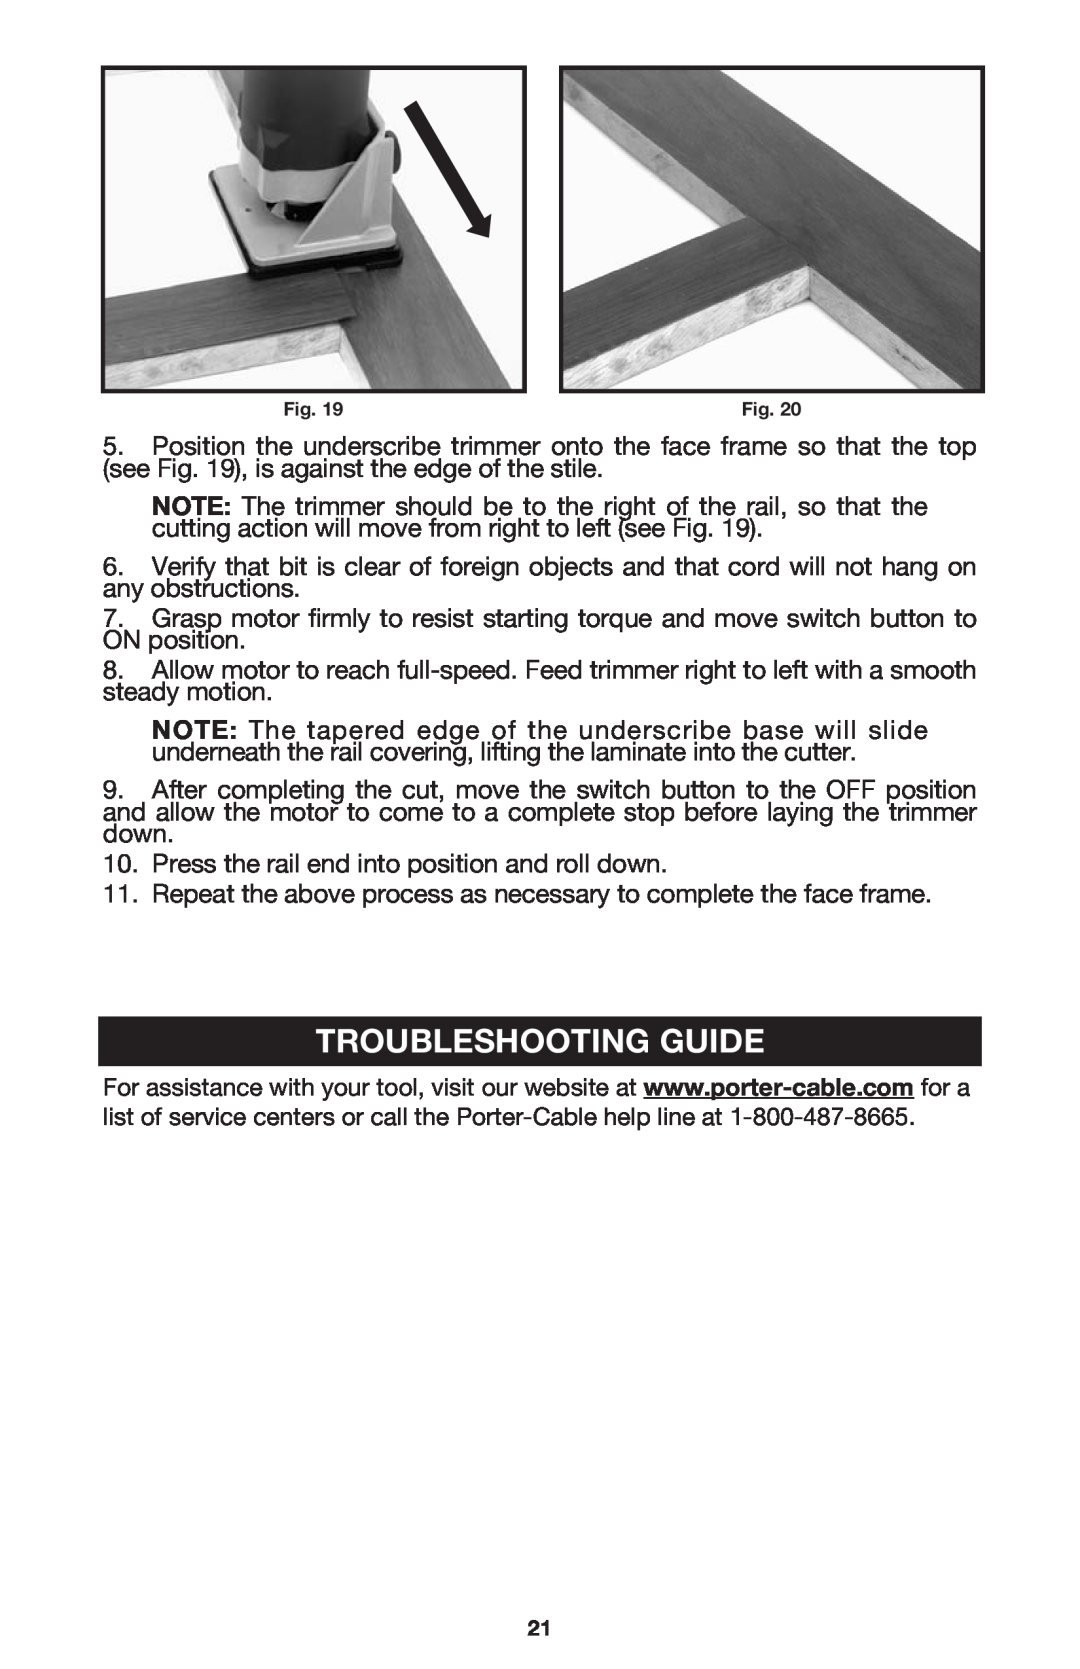 Porter-Cable 7310 instruction manual Troubleshooting Guide 